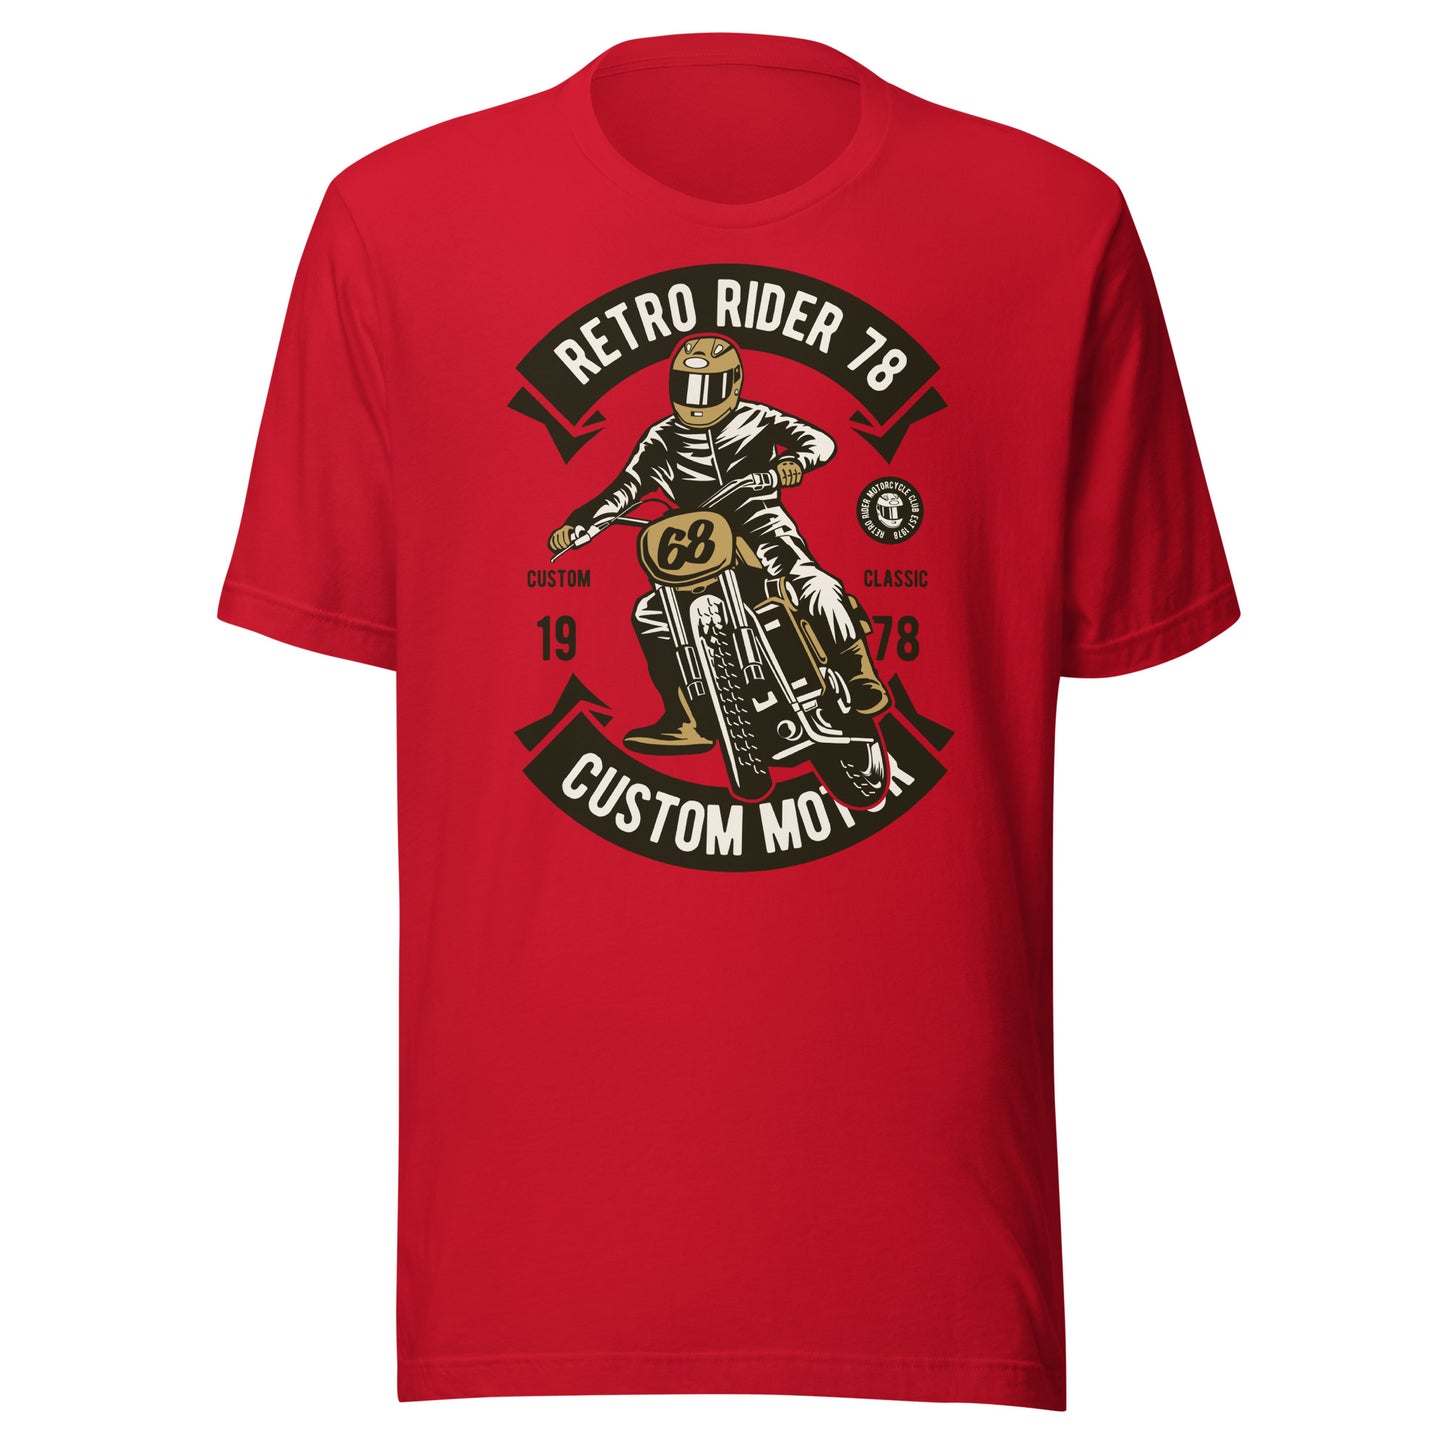 Vintage Vibes: Retro Rider T-shirts for Timeless Style